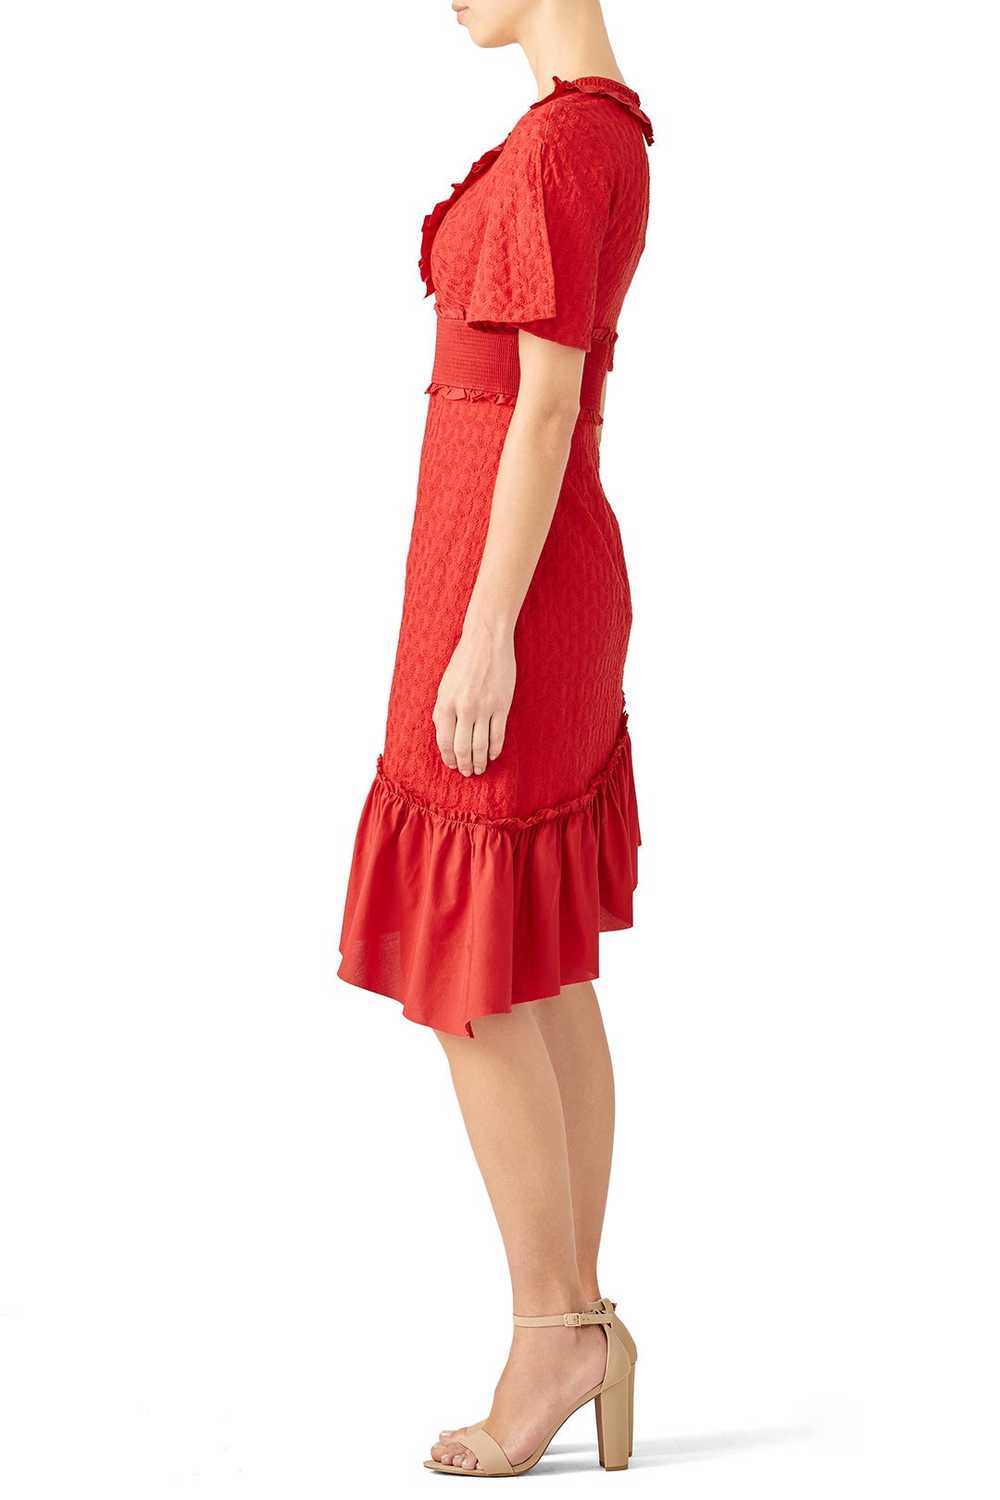 FINDERS KEEPERS Red Memento Dress - image 3